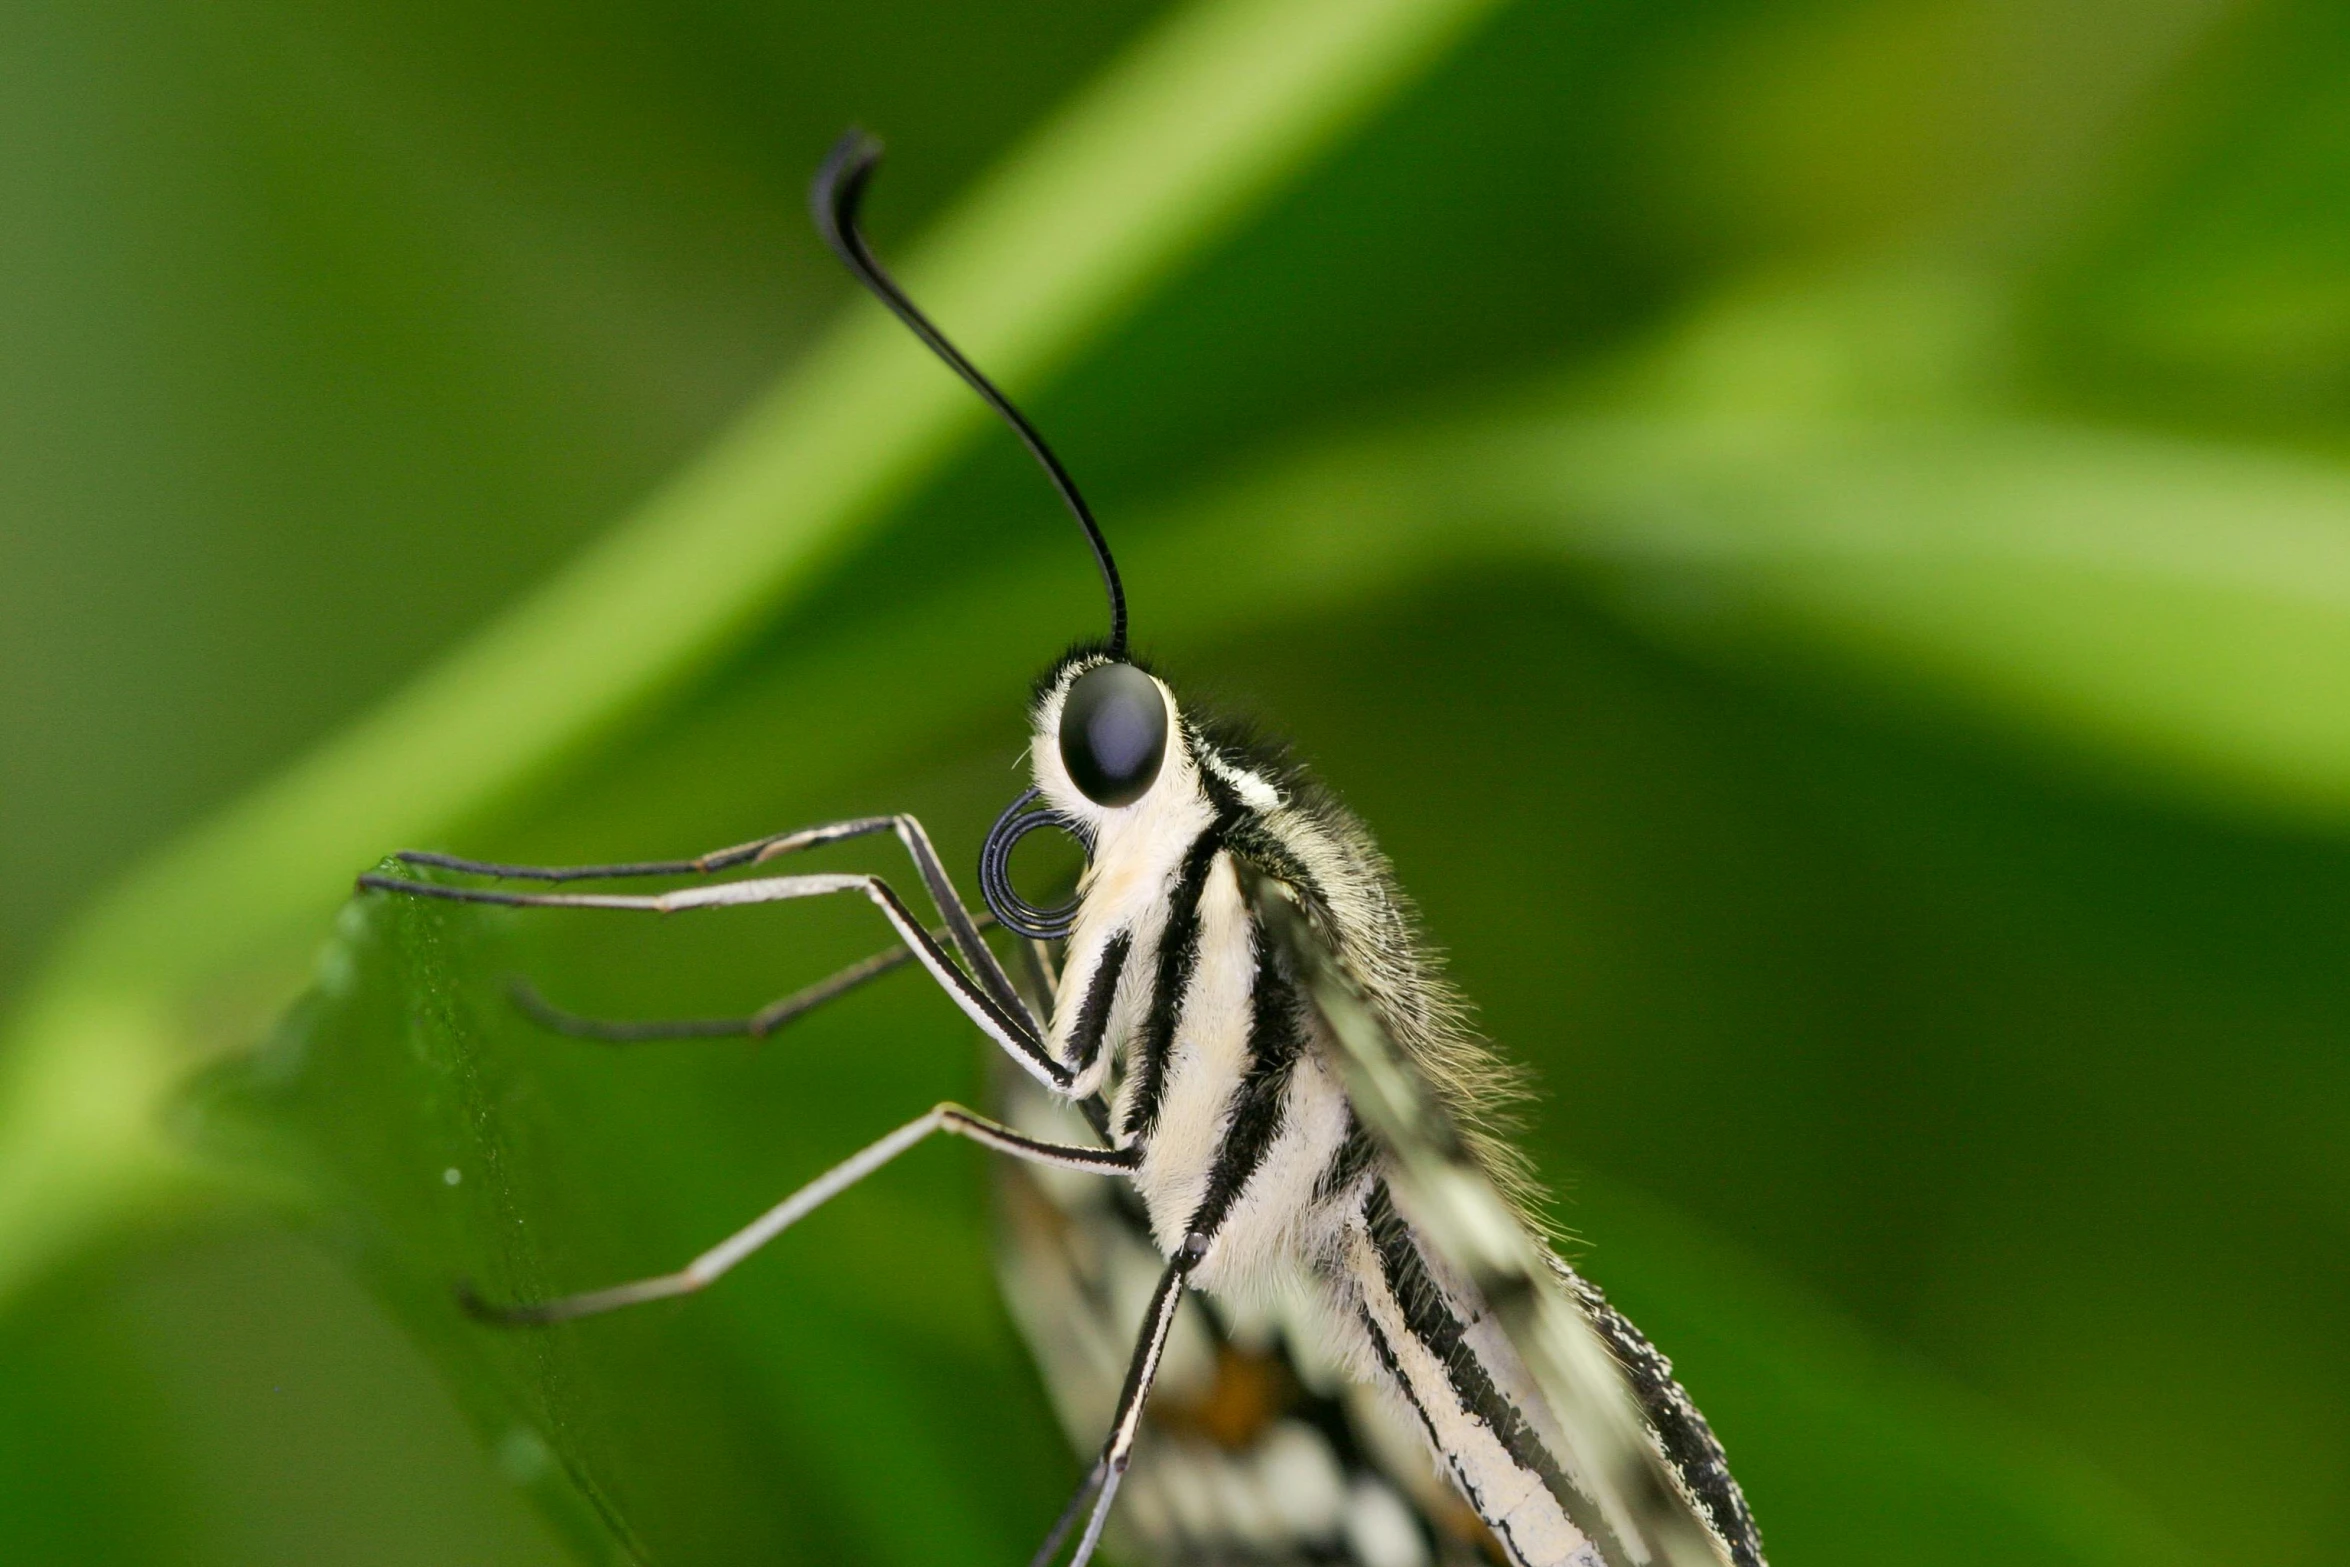 a striped insect rests on green leaves